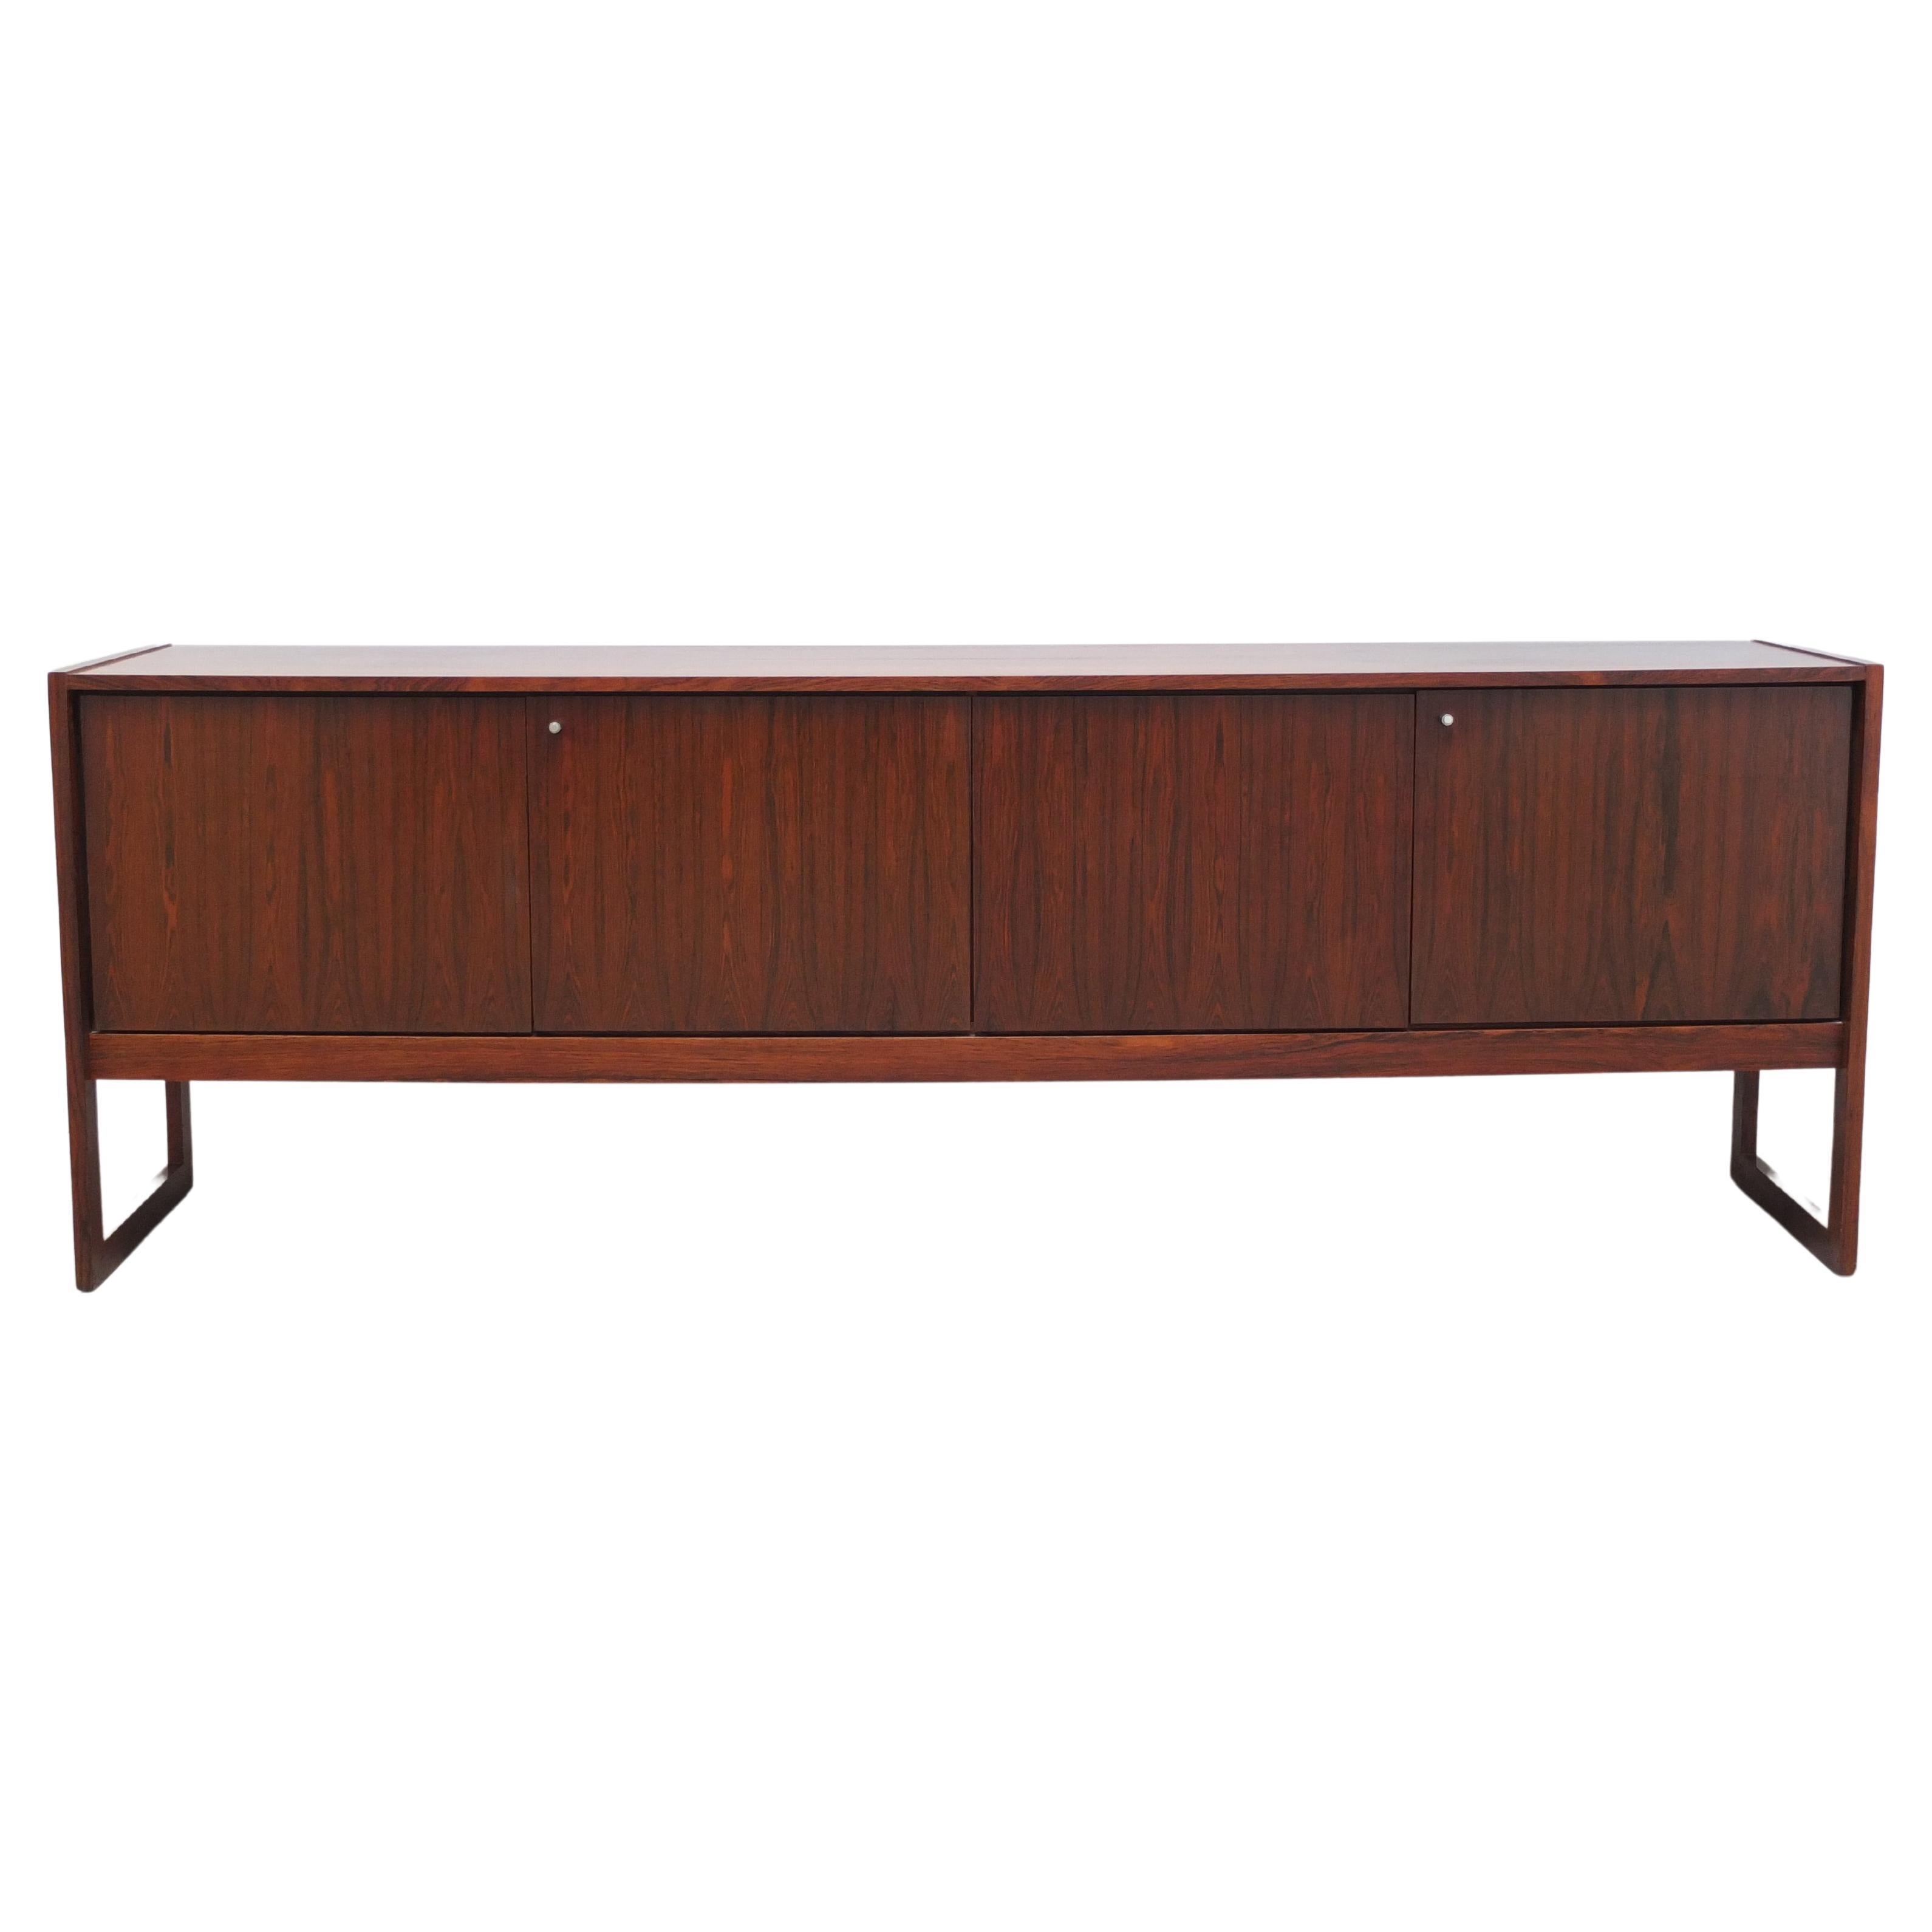 Large Exclusive 'Tecton' Sideboard by V-Form, 1960s